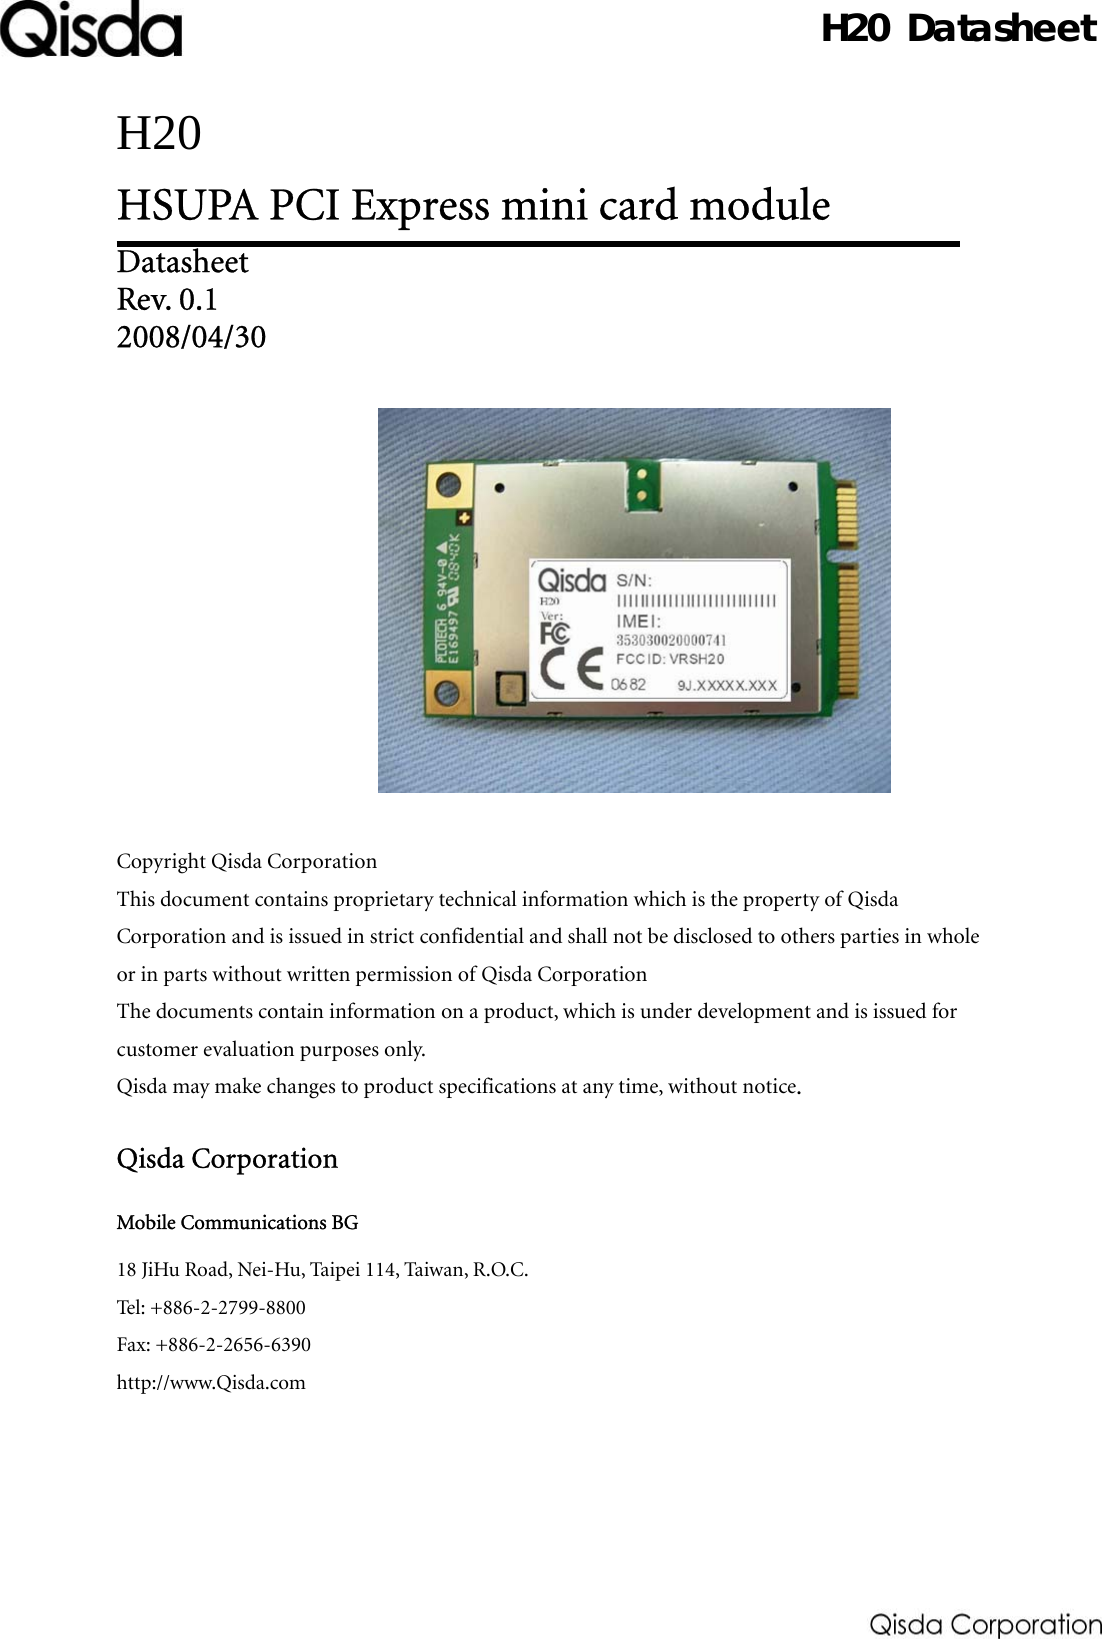   Datasheet H20 HSUPA PCI Express mini card module   Datasheet Rev. 0.1 2008/04/30               Copyright Qisda Corporation This document contains proprietary technical information which is the property of Qisda Corporation and is issued in strict confidential and shall not be disclosed to others parties in whole or in parts without written permission of Qisda Corporation The documents contain information on a product, which is under development and is issued for customer evaluation purposes only.   Qisda may make changes to product specifications at any time, without notice.  Qisda Corporation Mobile Communications BG 18 JiHu Road, Nei-Hu, Taipei 114, Taiwan, R.O.C. Tel: +886-2-2799-8800 Fax: +886-2-2656-6390 http://www.Qisda.com     H20 Datasheet 